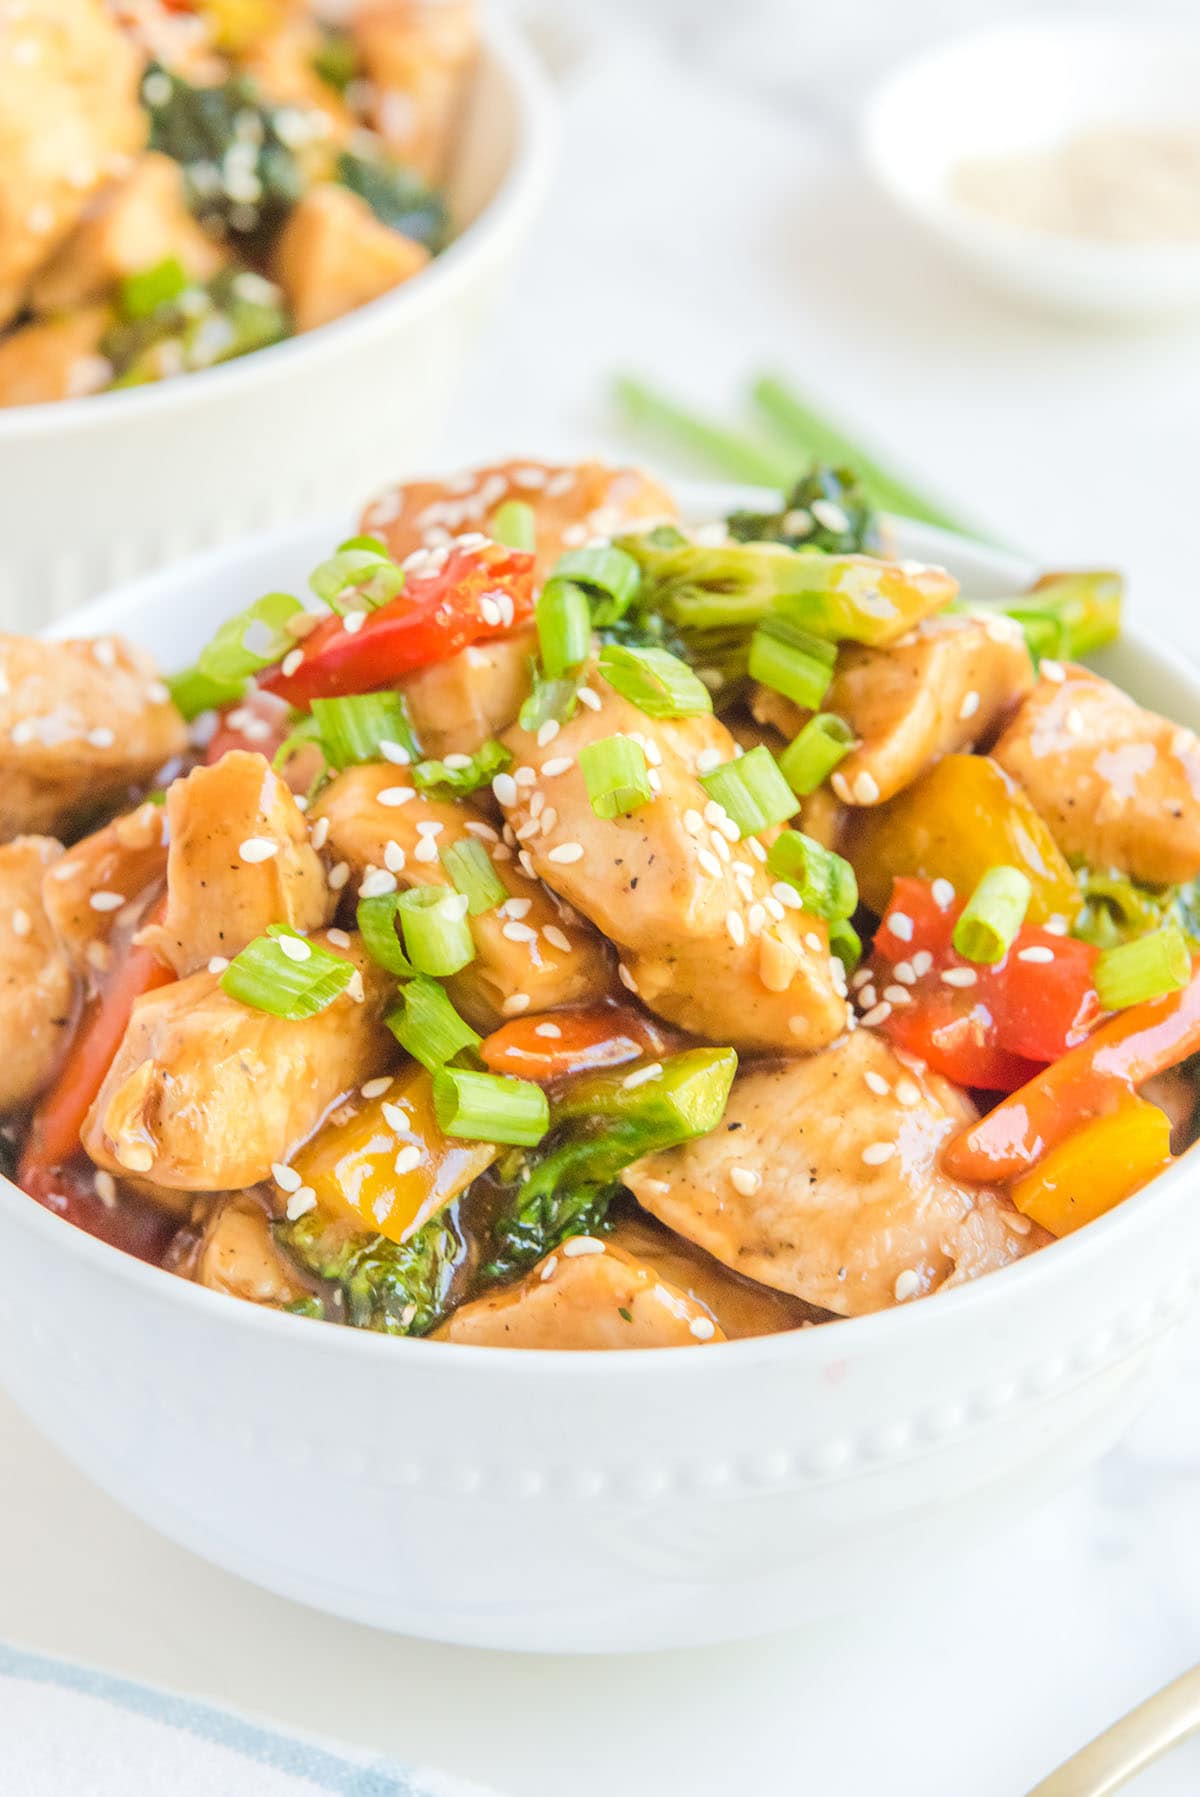 stir fry chicken served with rice in a bowl.